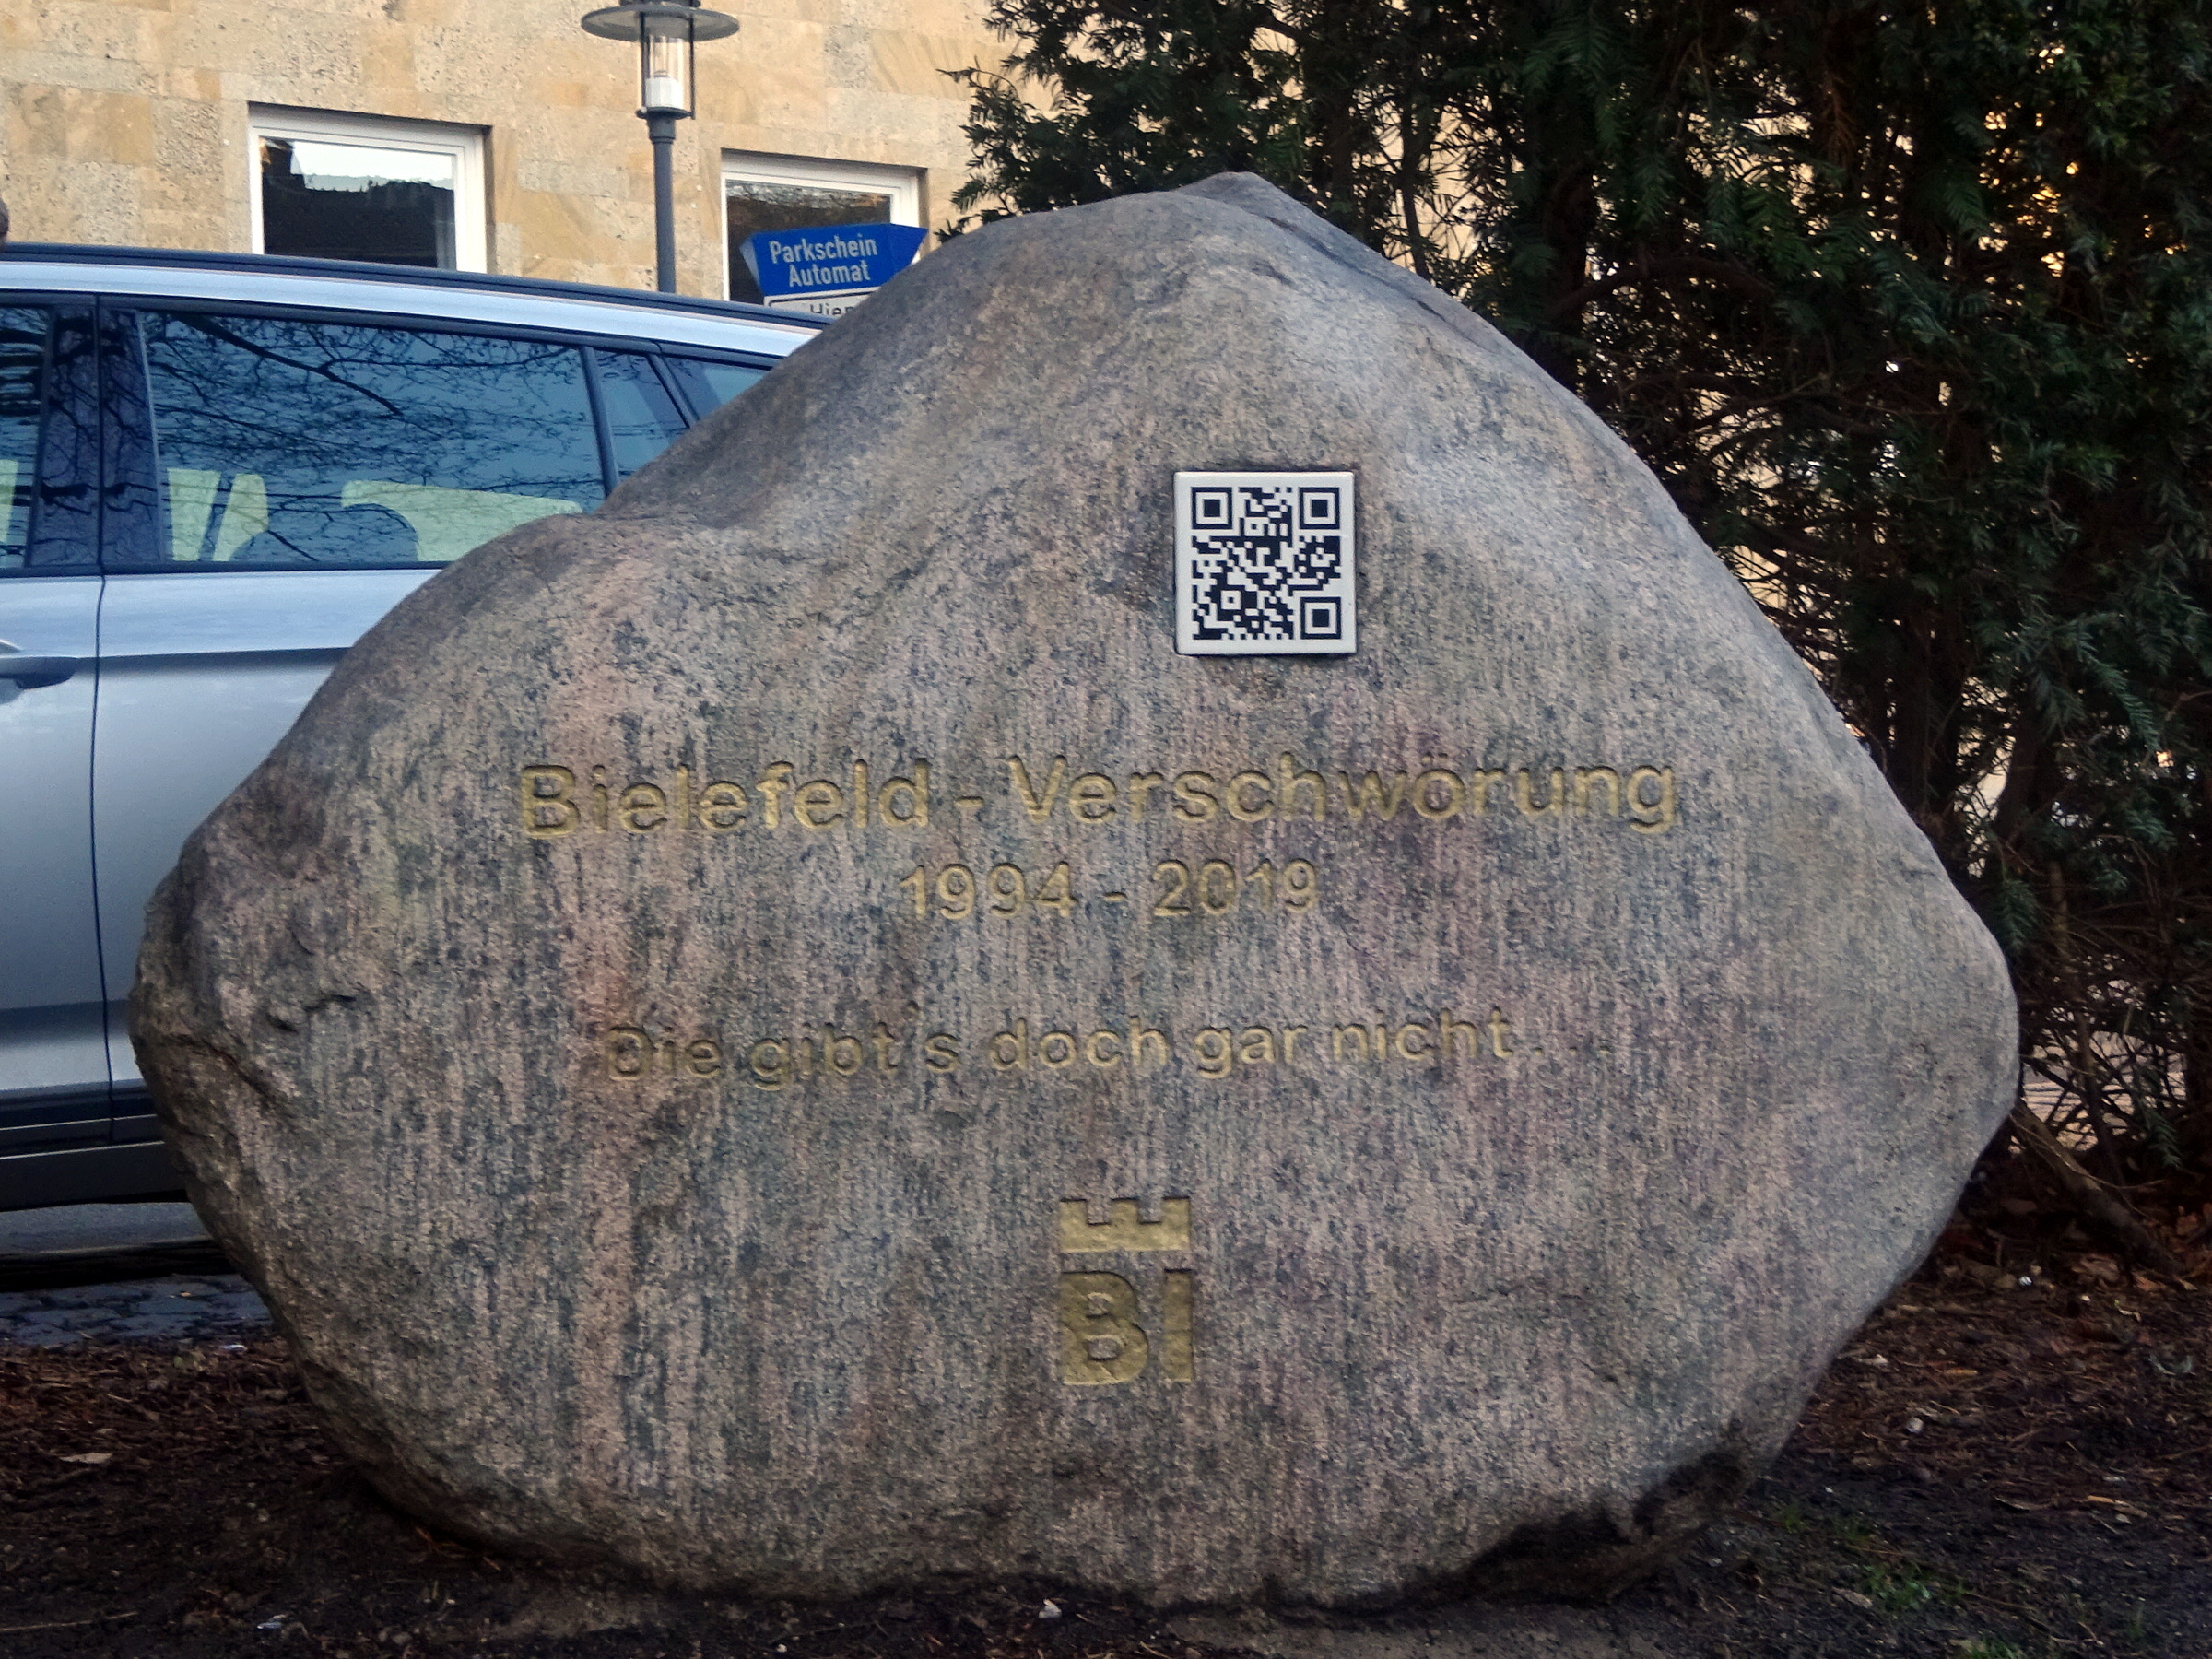 A large rock with a qr code in front of it.